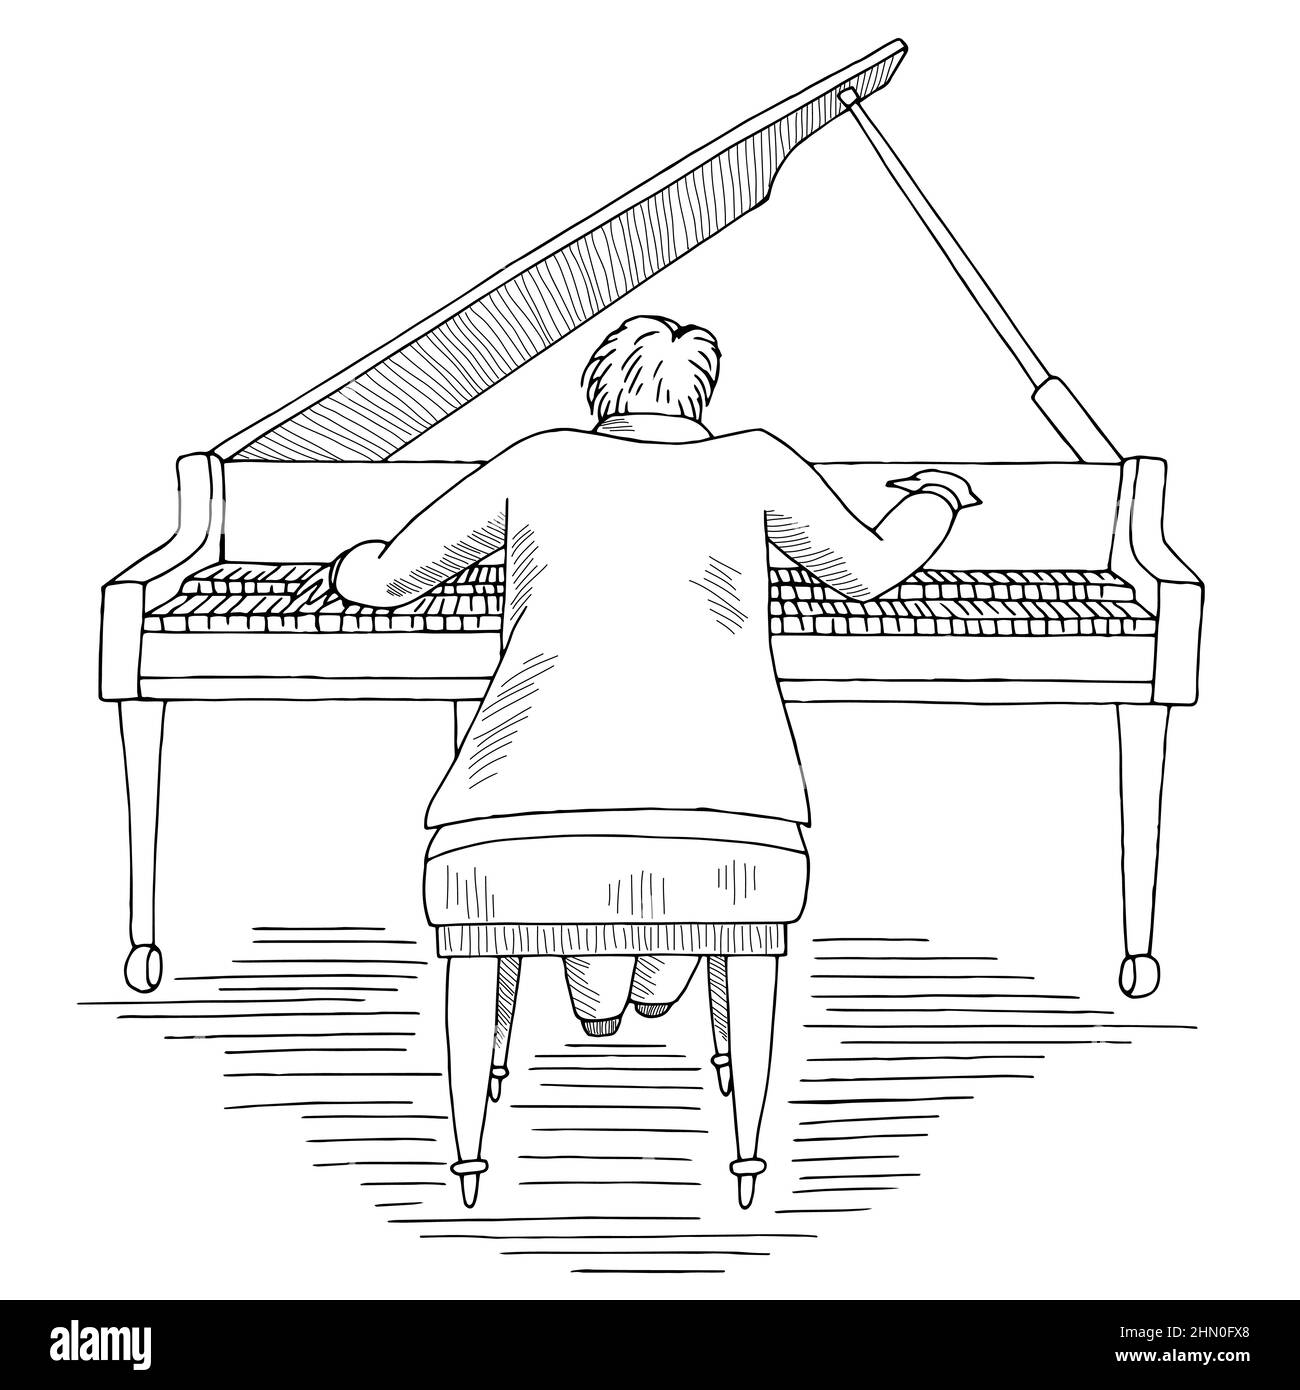 Piano Drawing  How To Draw A Piano Step By Step